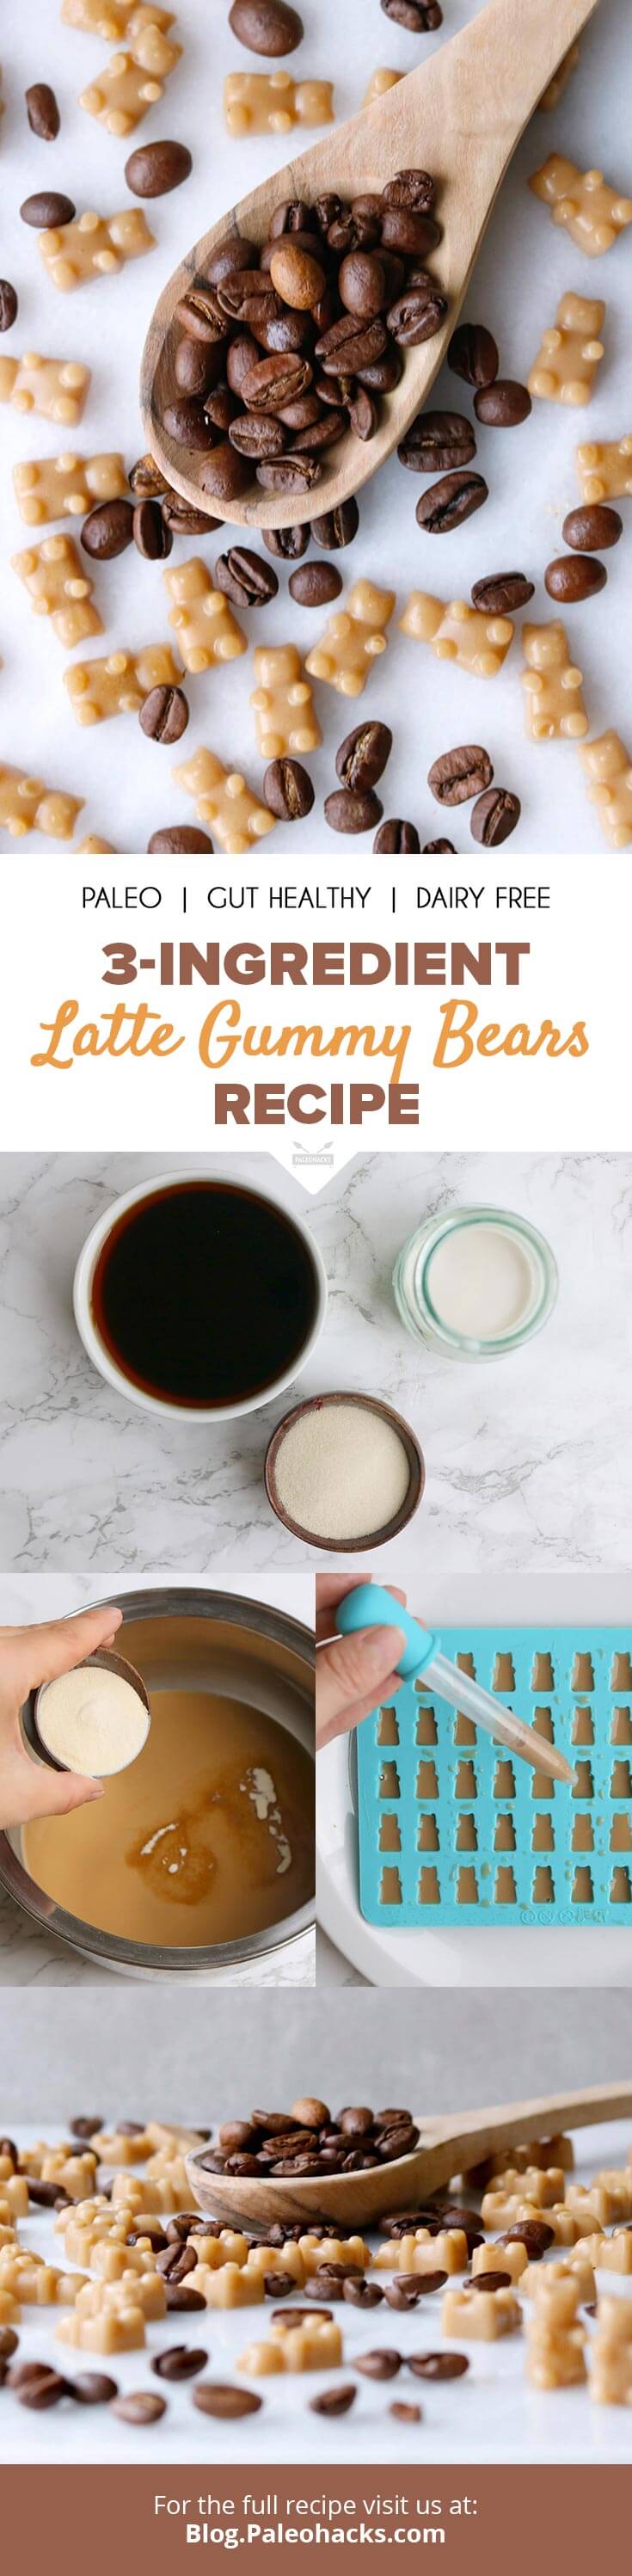 All you need to make these gut-friendly gummy bears is grass-fed gelatin, your favorite espresso, and coconut milk.